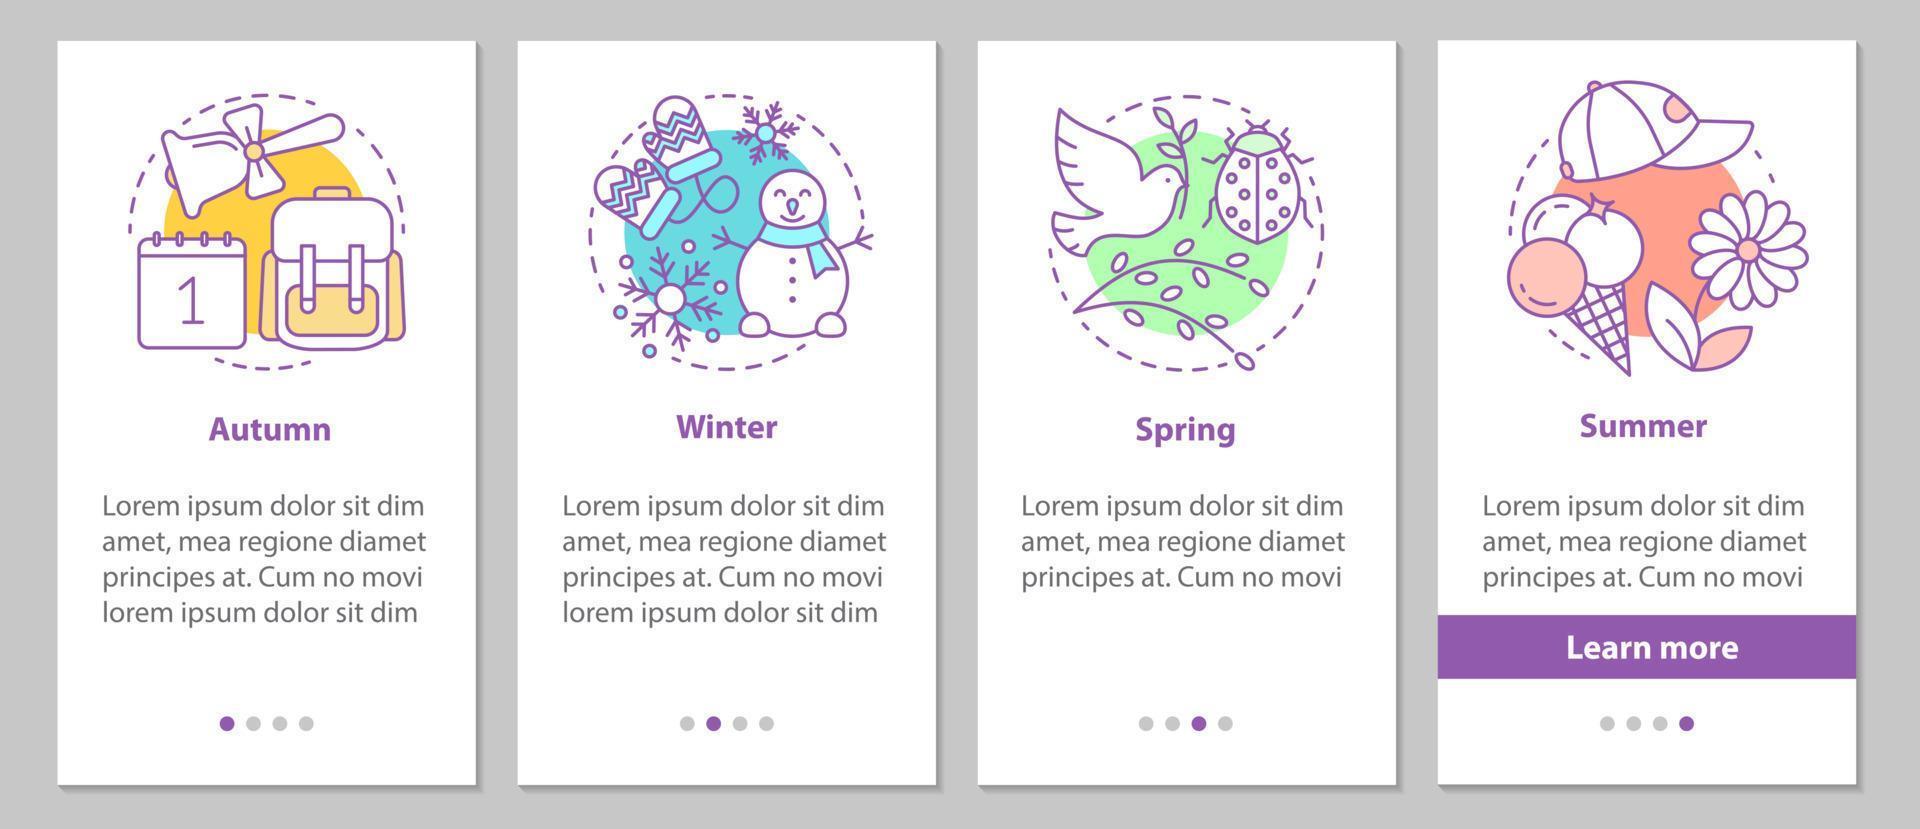 Four seasons onboarding mobile app page screen with linear concepts. Winter, autumn, spring, summer steps graphic instructions. UX, UI, GUI vector template with illustrations